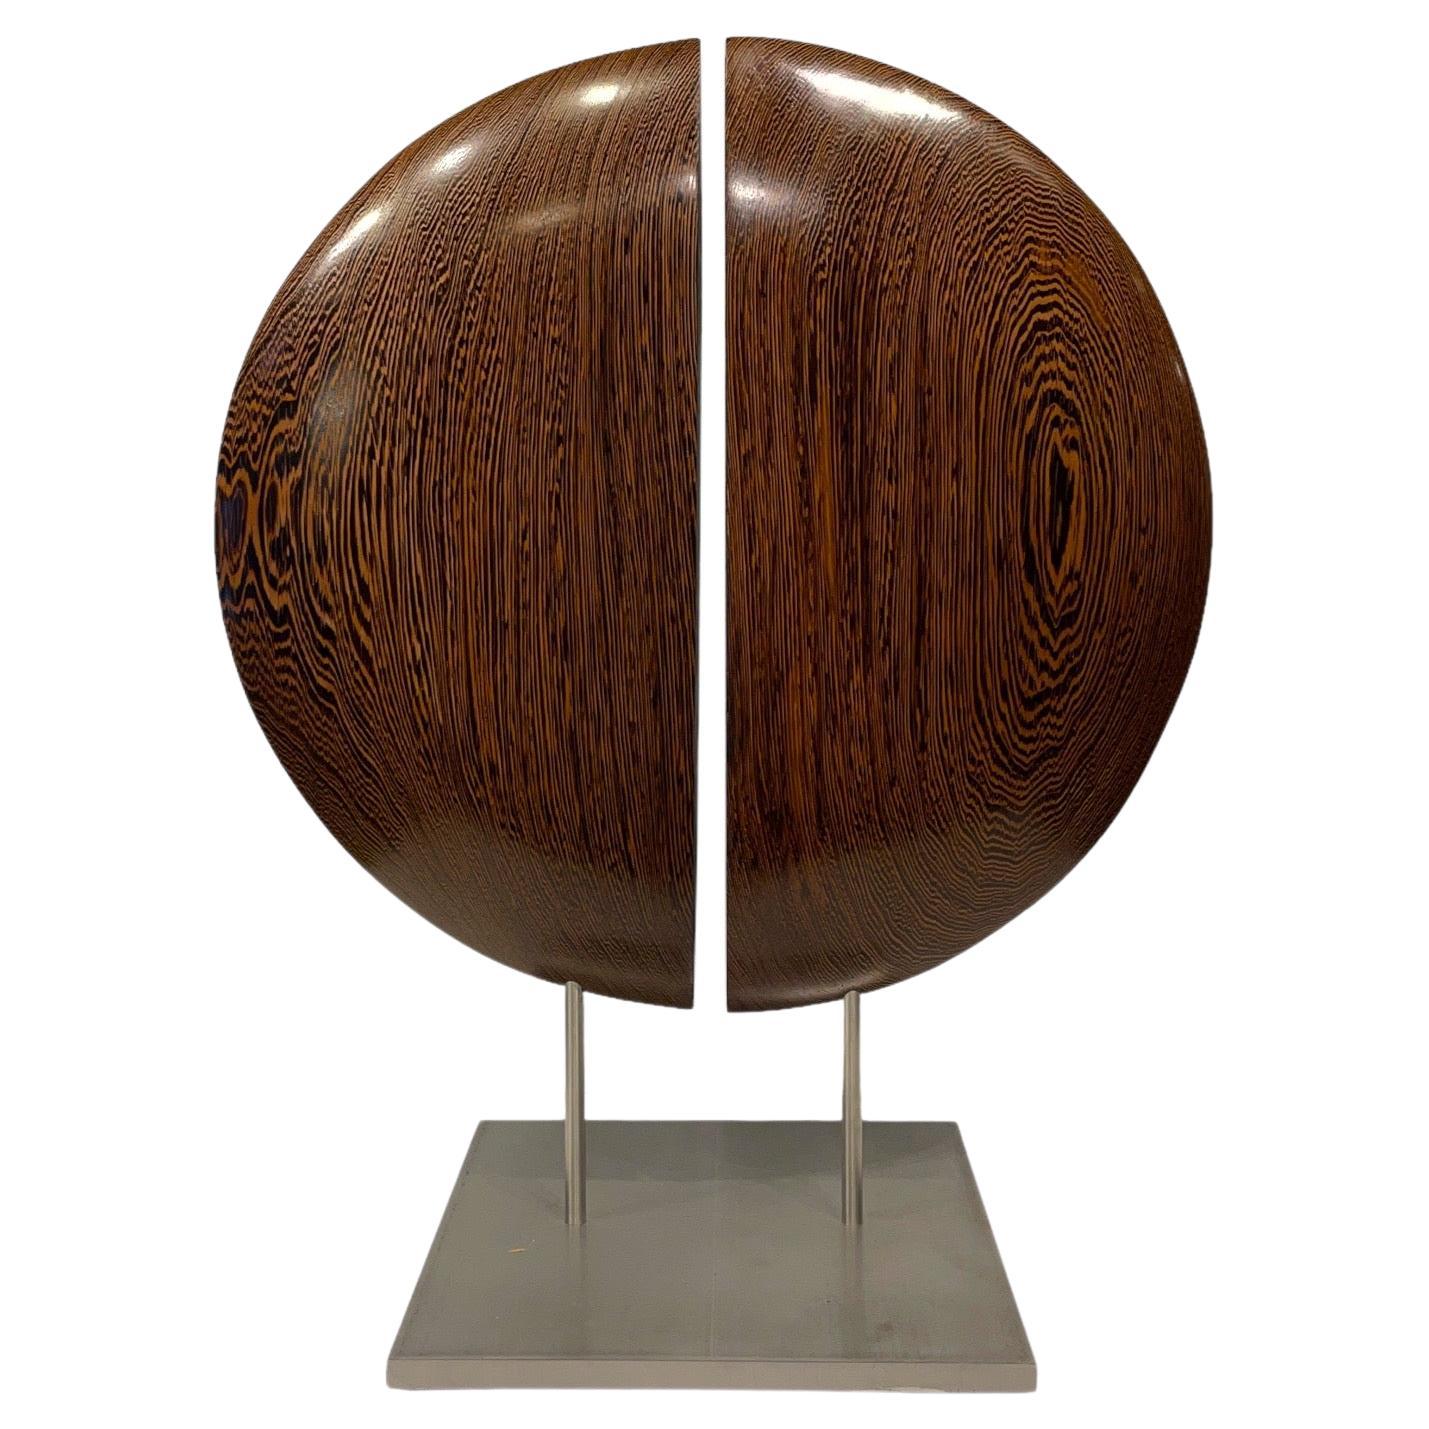 Wenge Wood Double Half-Moon Hand Carved Sculpture Mounted on Steel Base